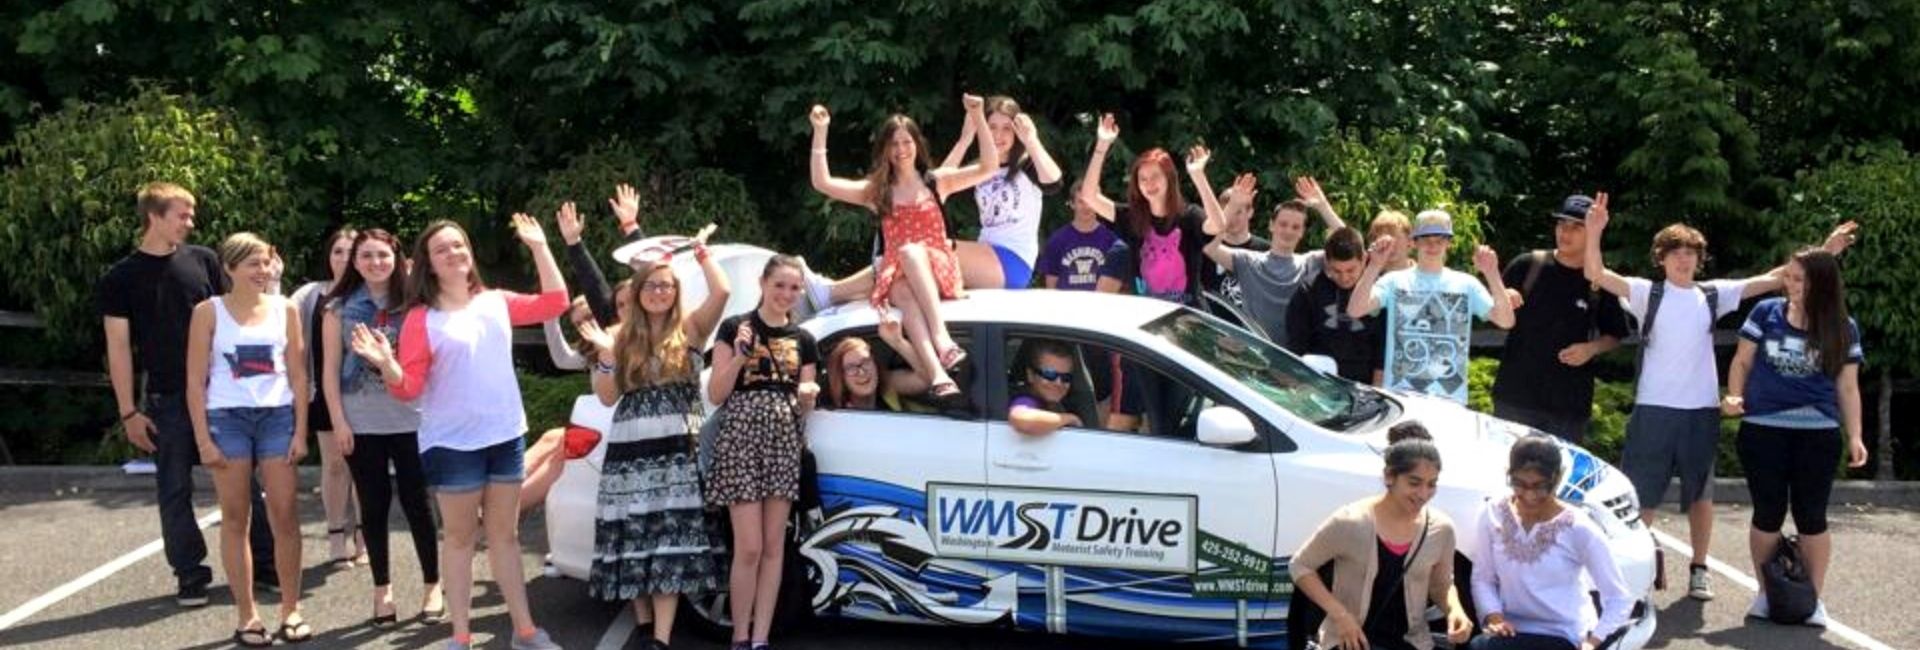 mariner high school drivers ed students sitting on a white drive car smiling and waving